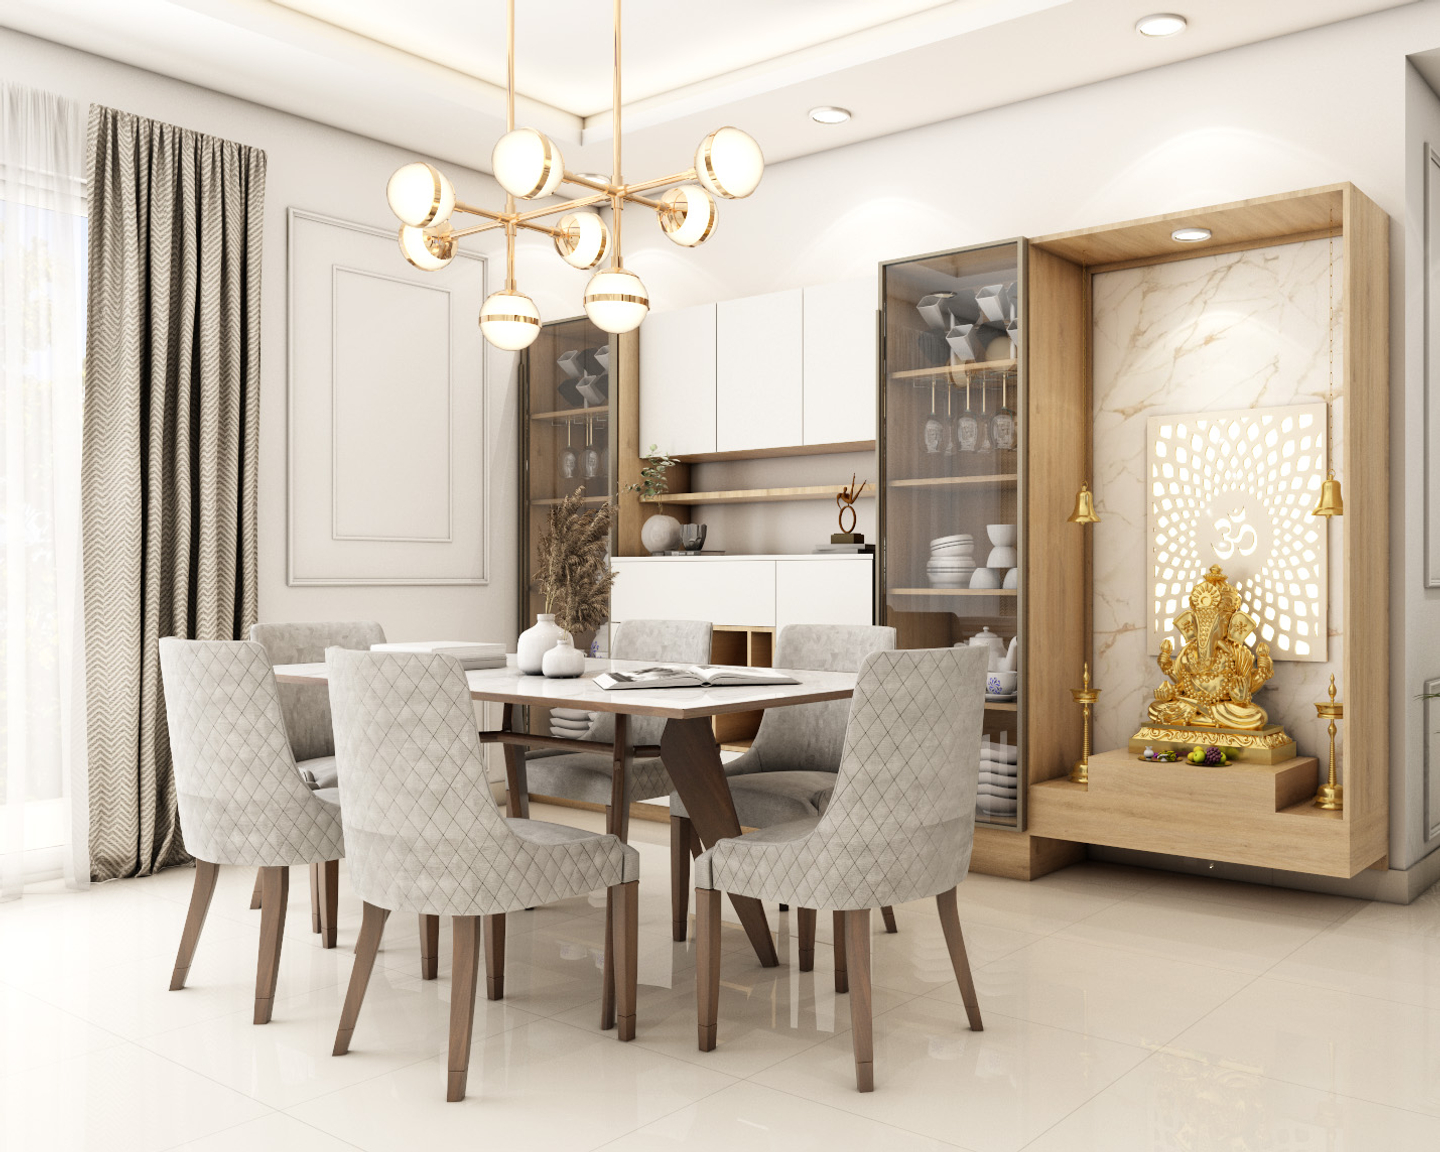 6-Seater Dining Room With Crockery Unit And An Integrated Pooja Unit - Livspace